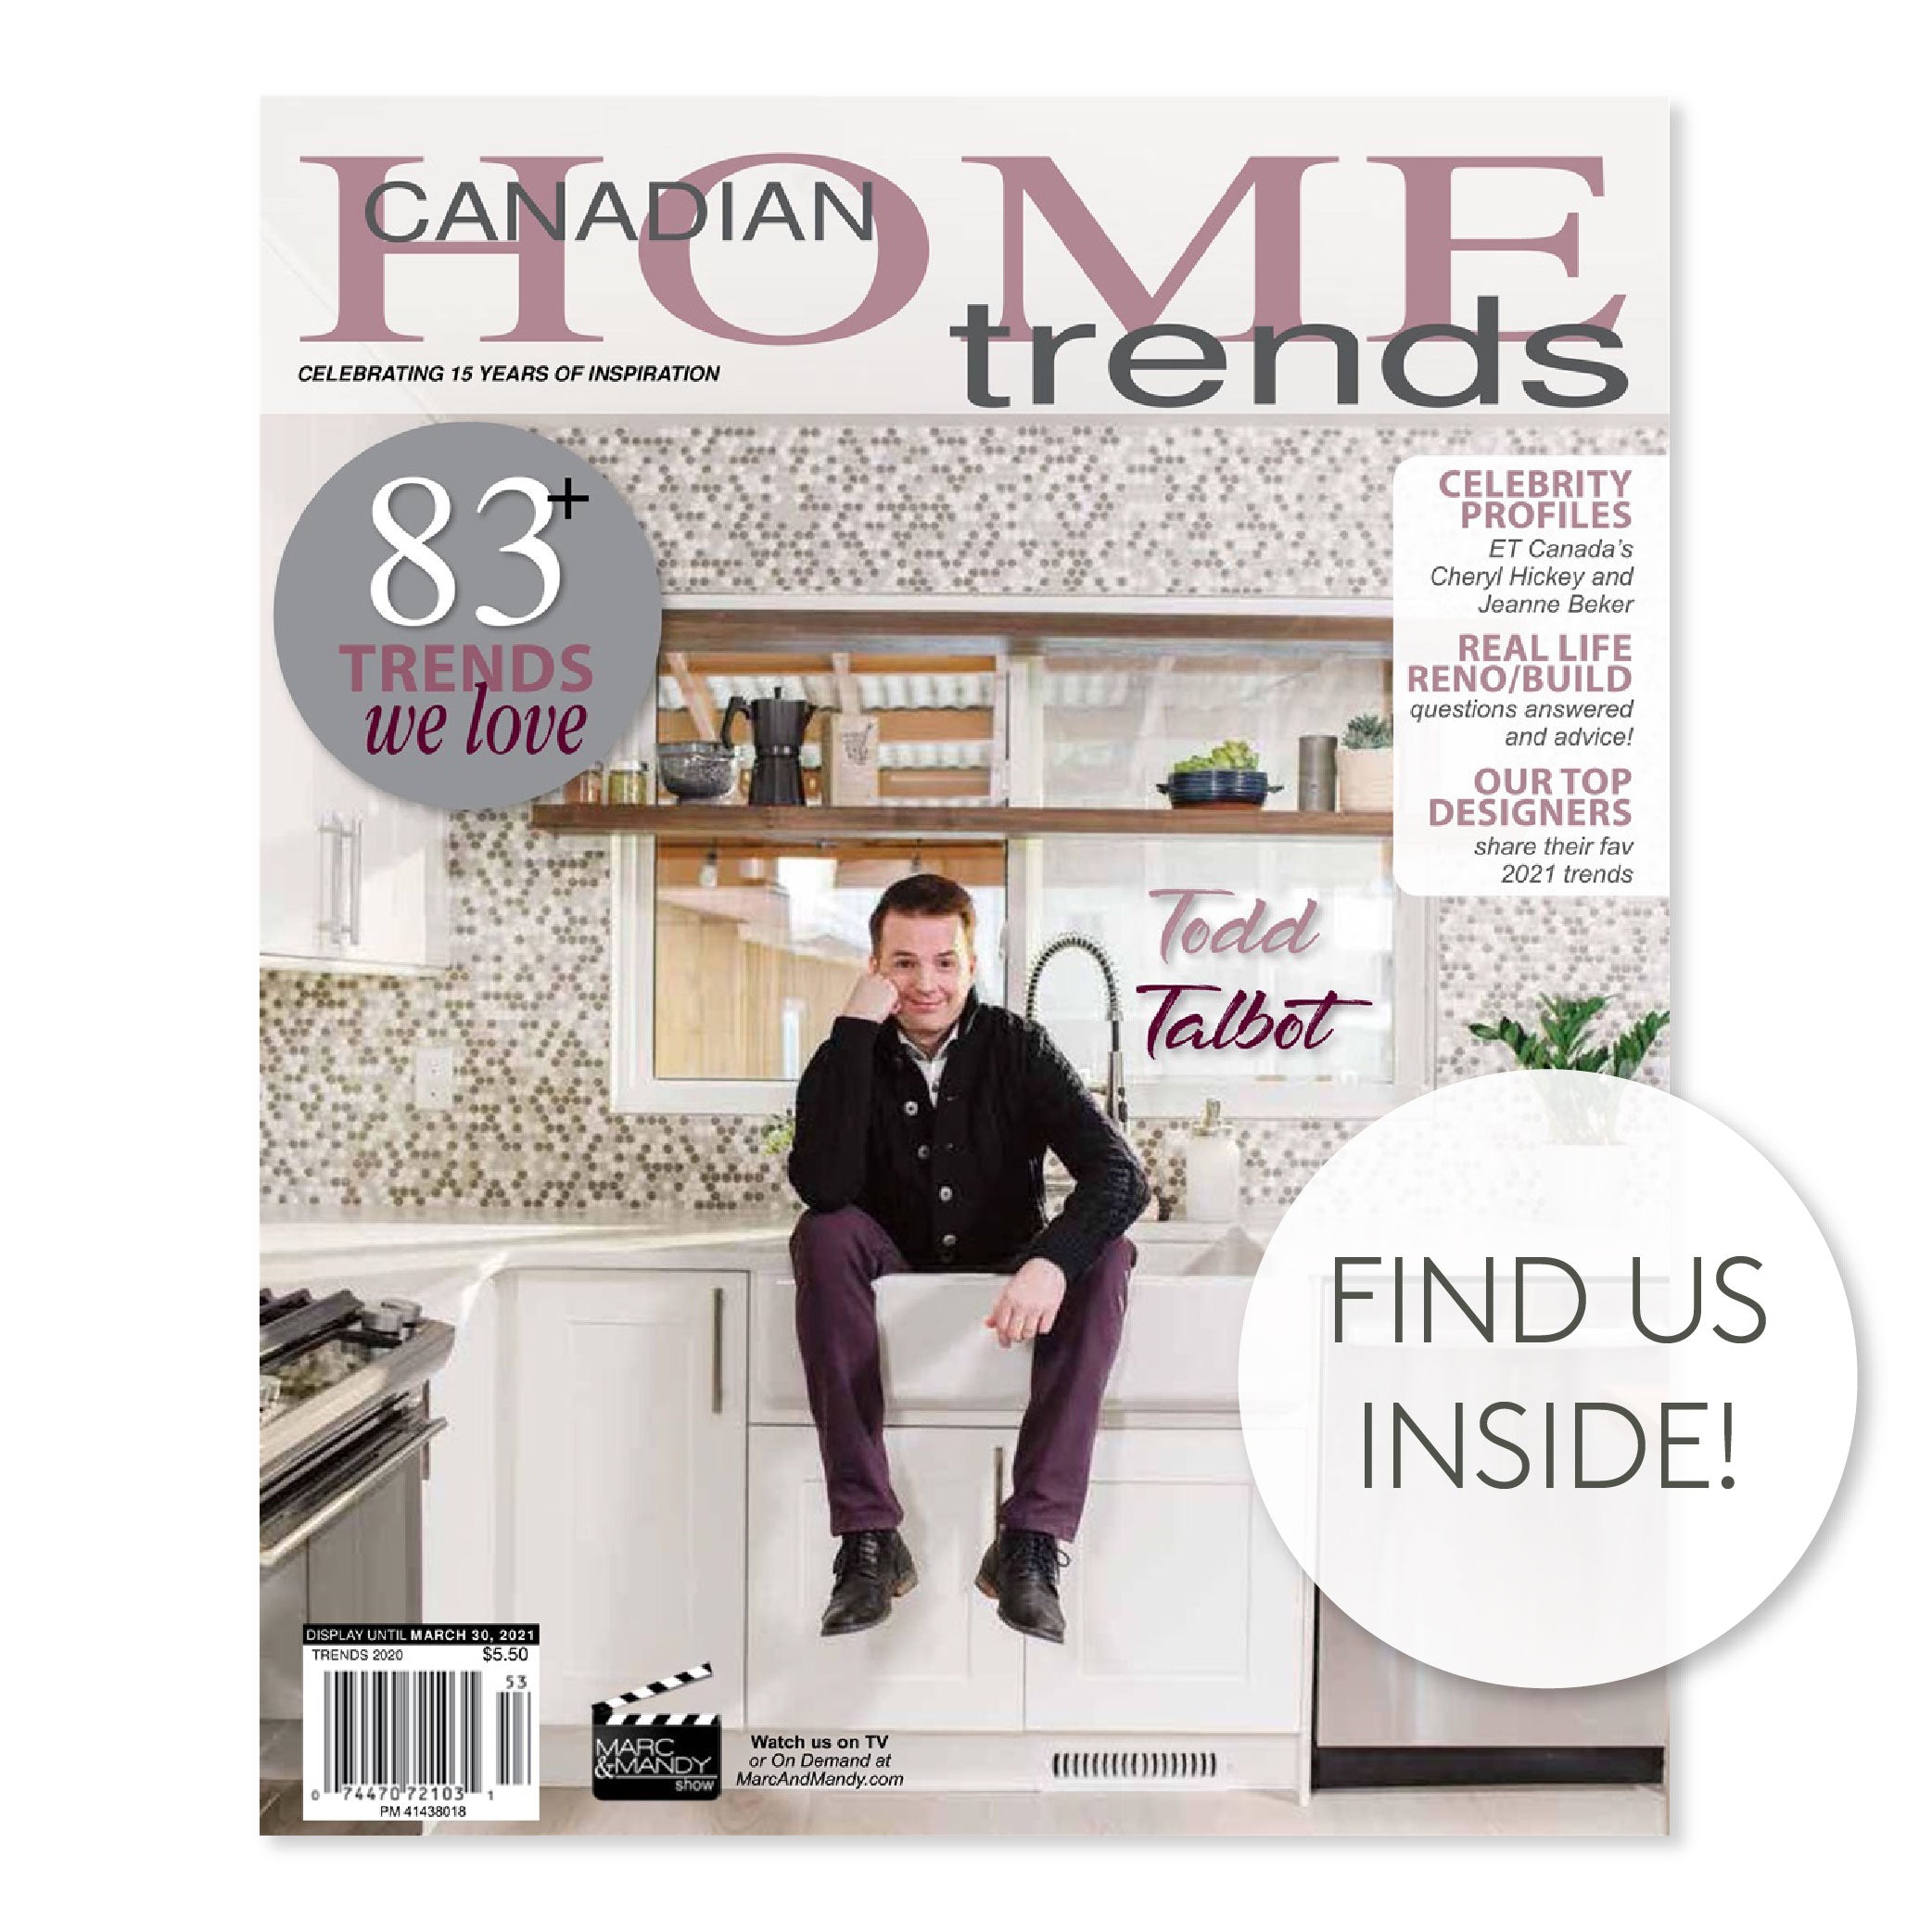 Canadian Home Trends - March 2021